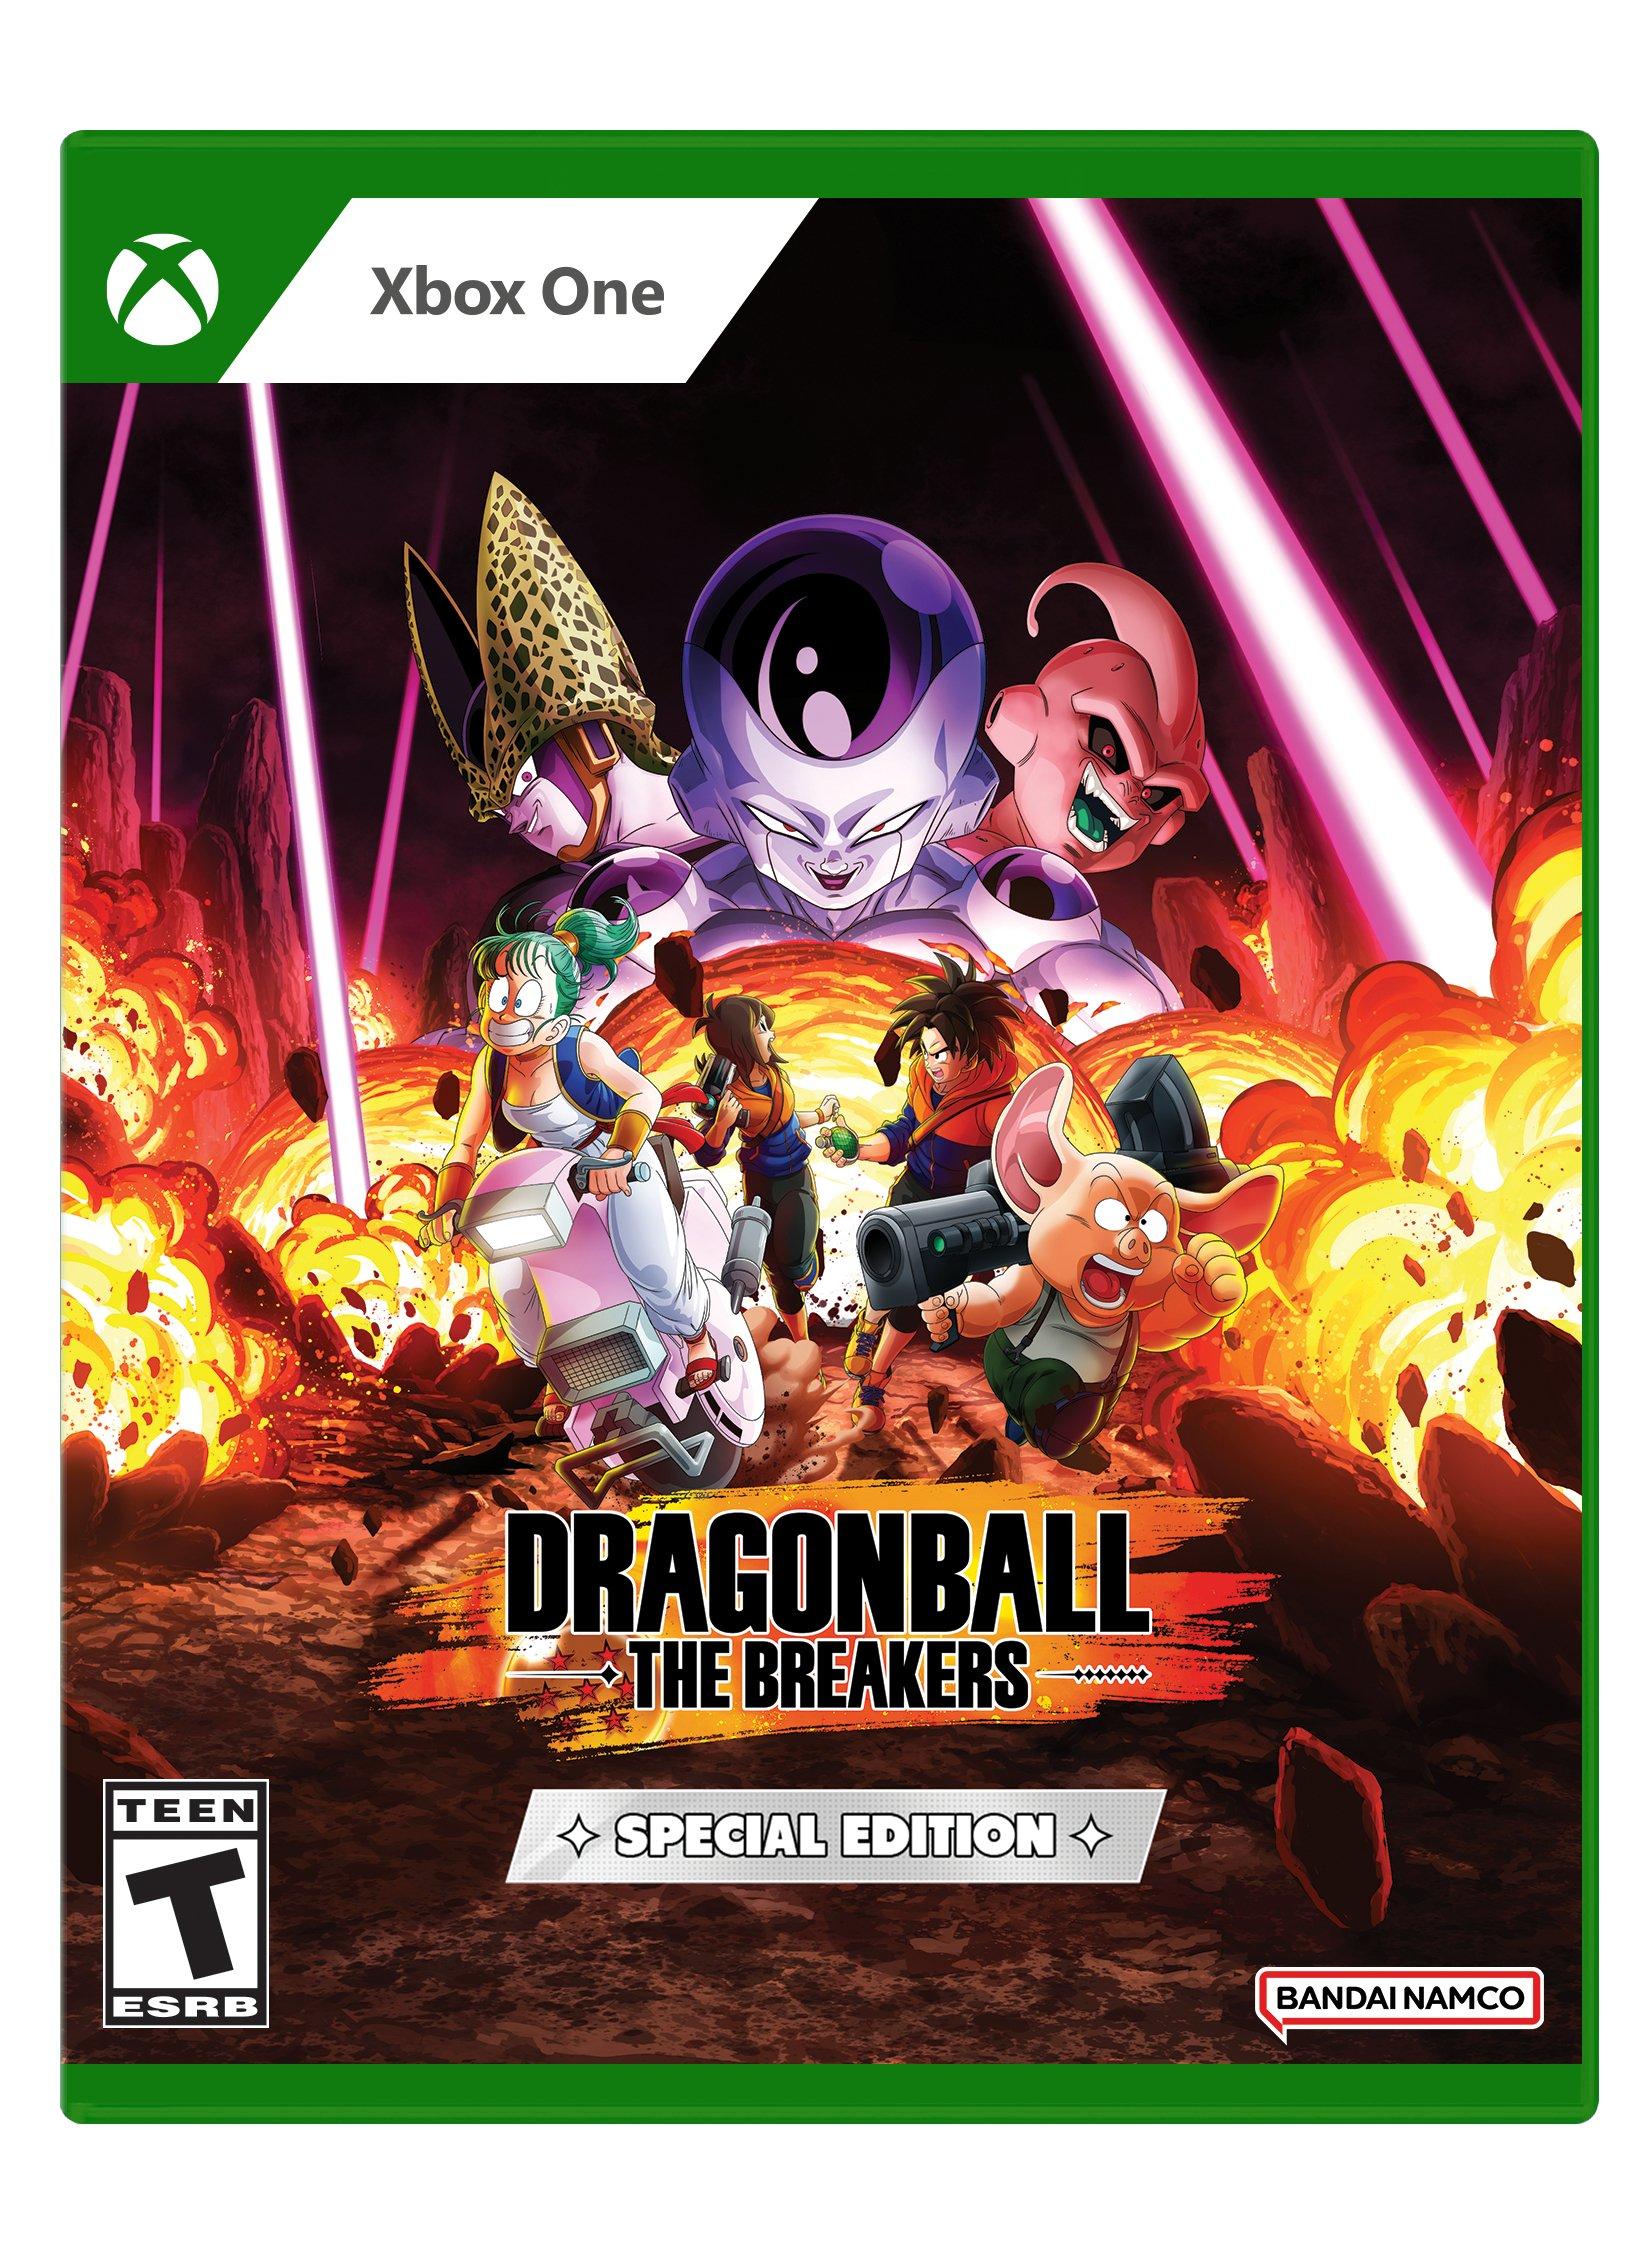 DRAGON BALL: THE BREAKERS SPECIAL EDITION - Xbox One